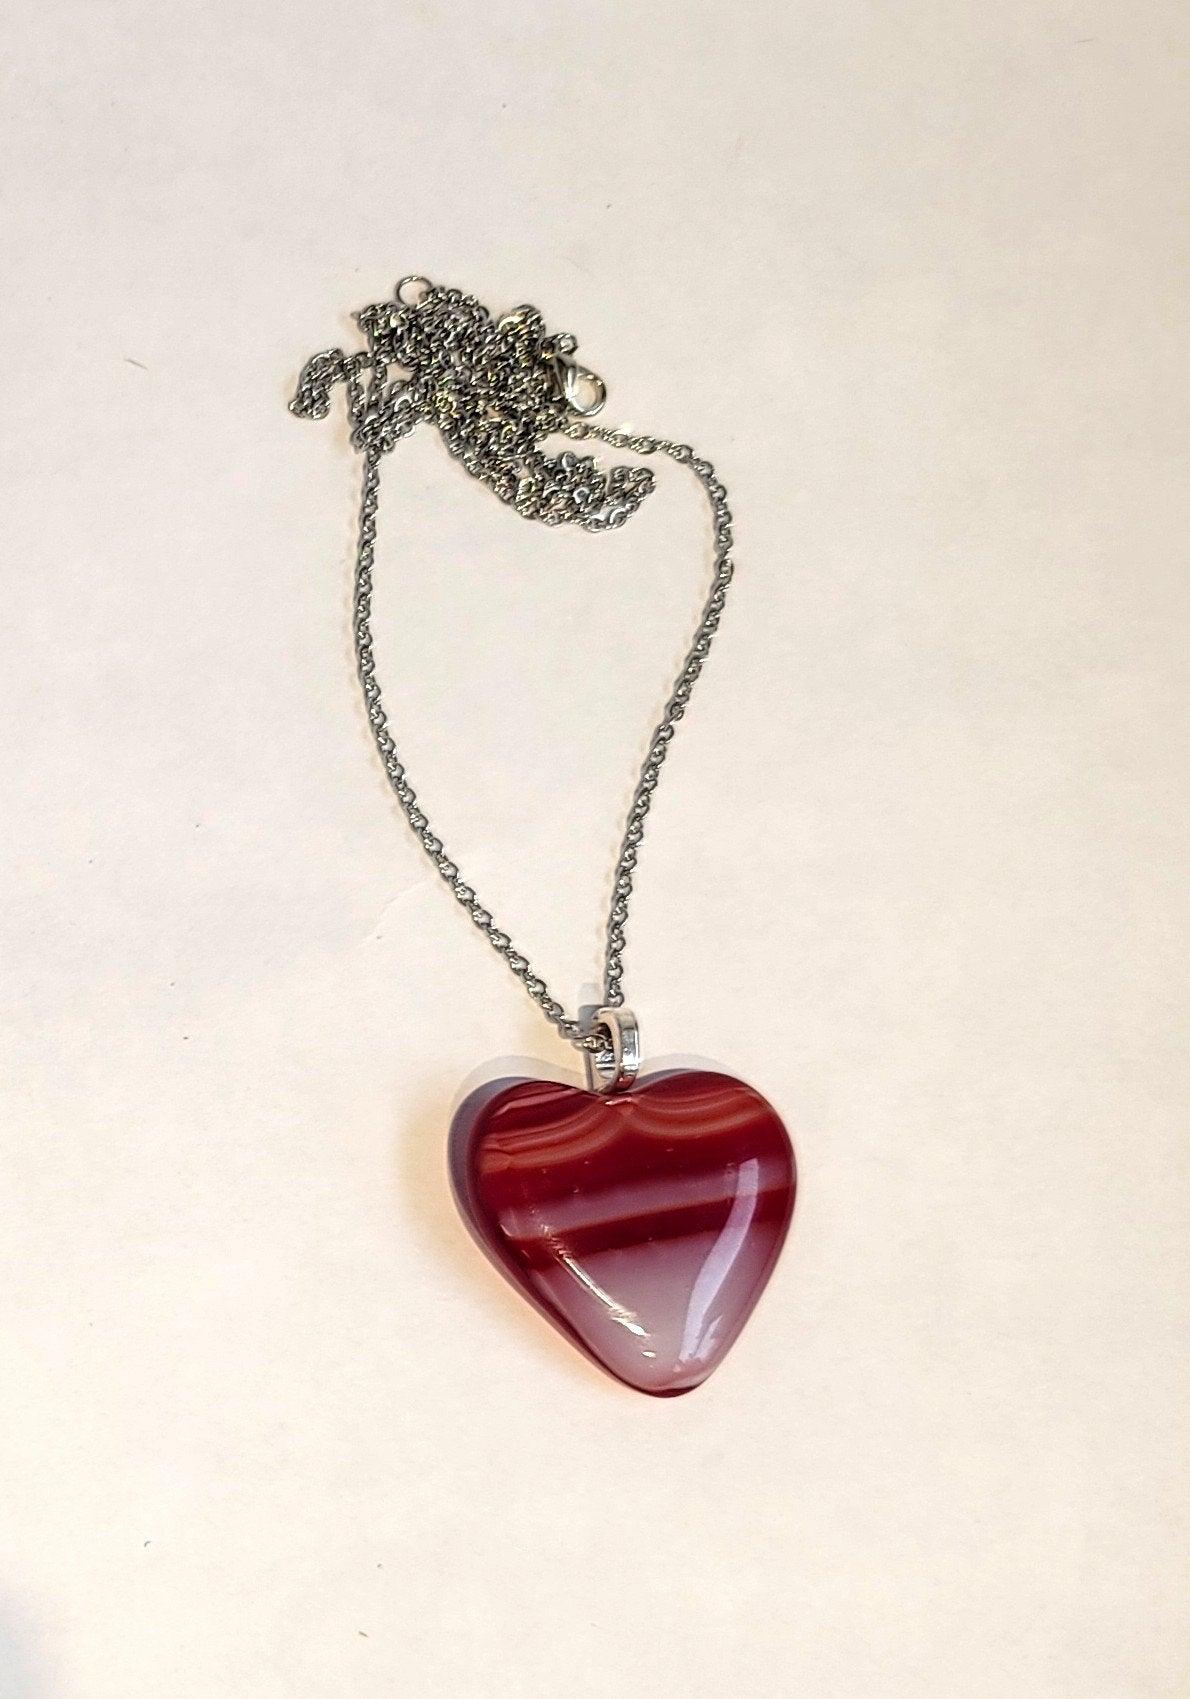 Red and White Striped Fused Glass Heart Pendant necklace on 18 inch stainless steel chain